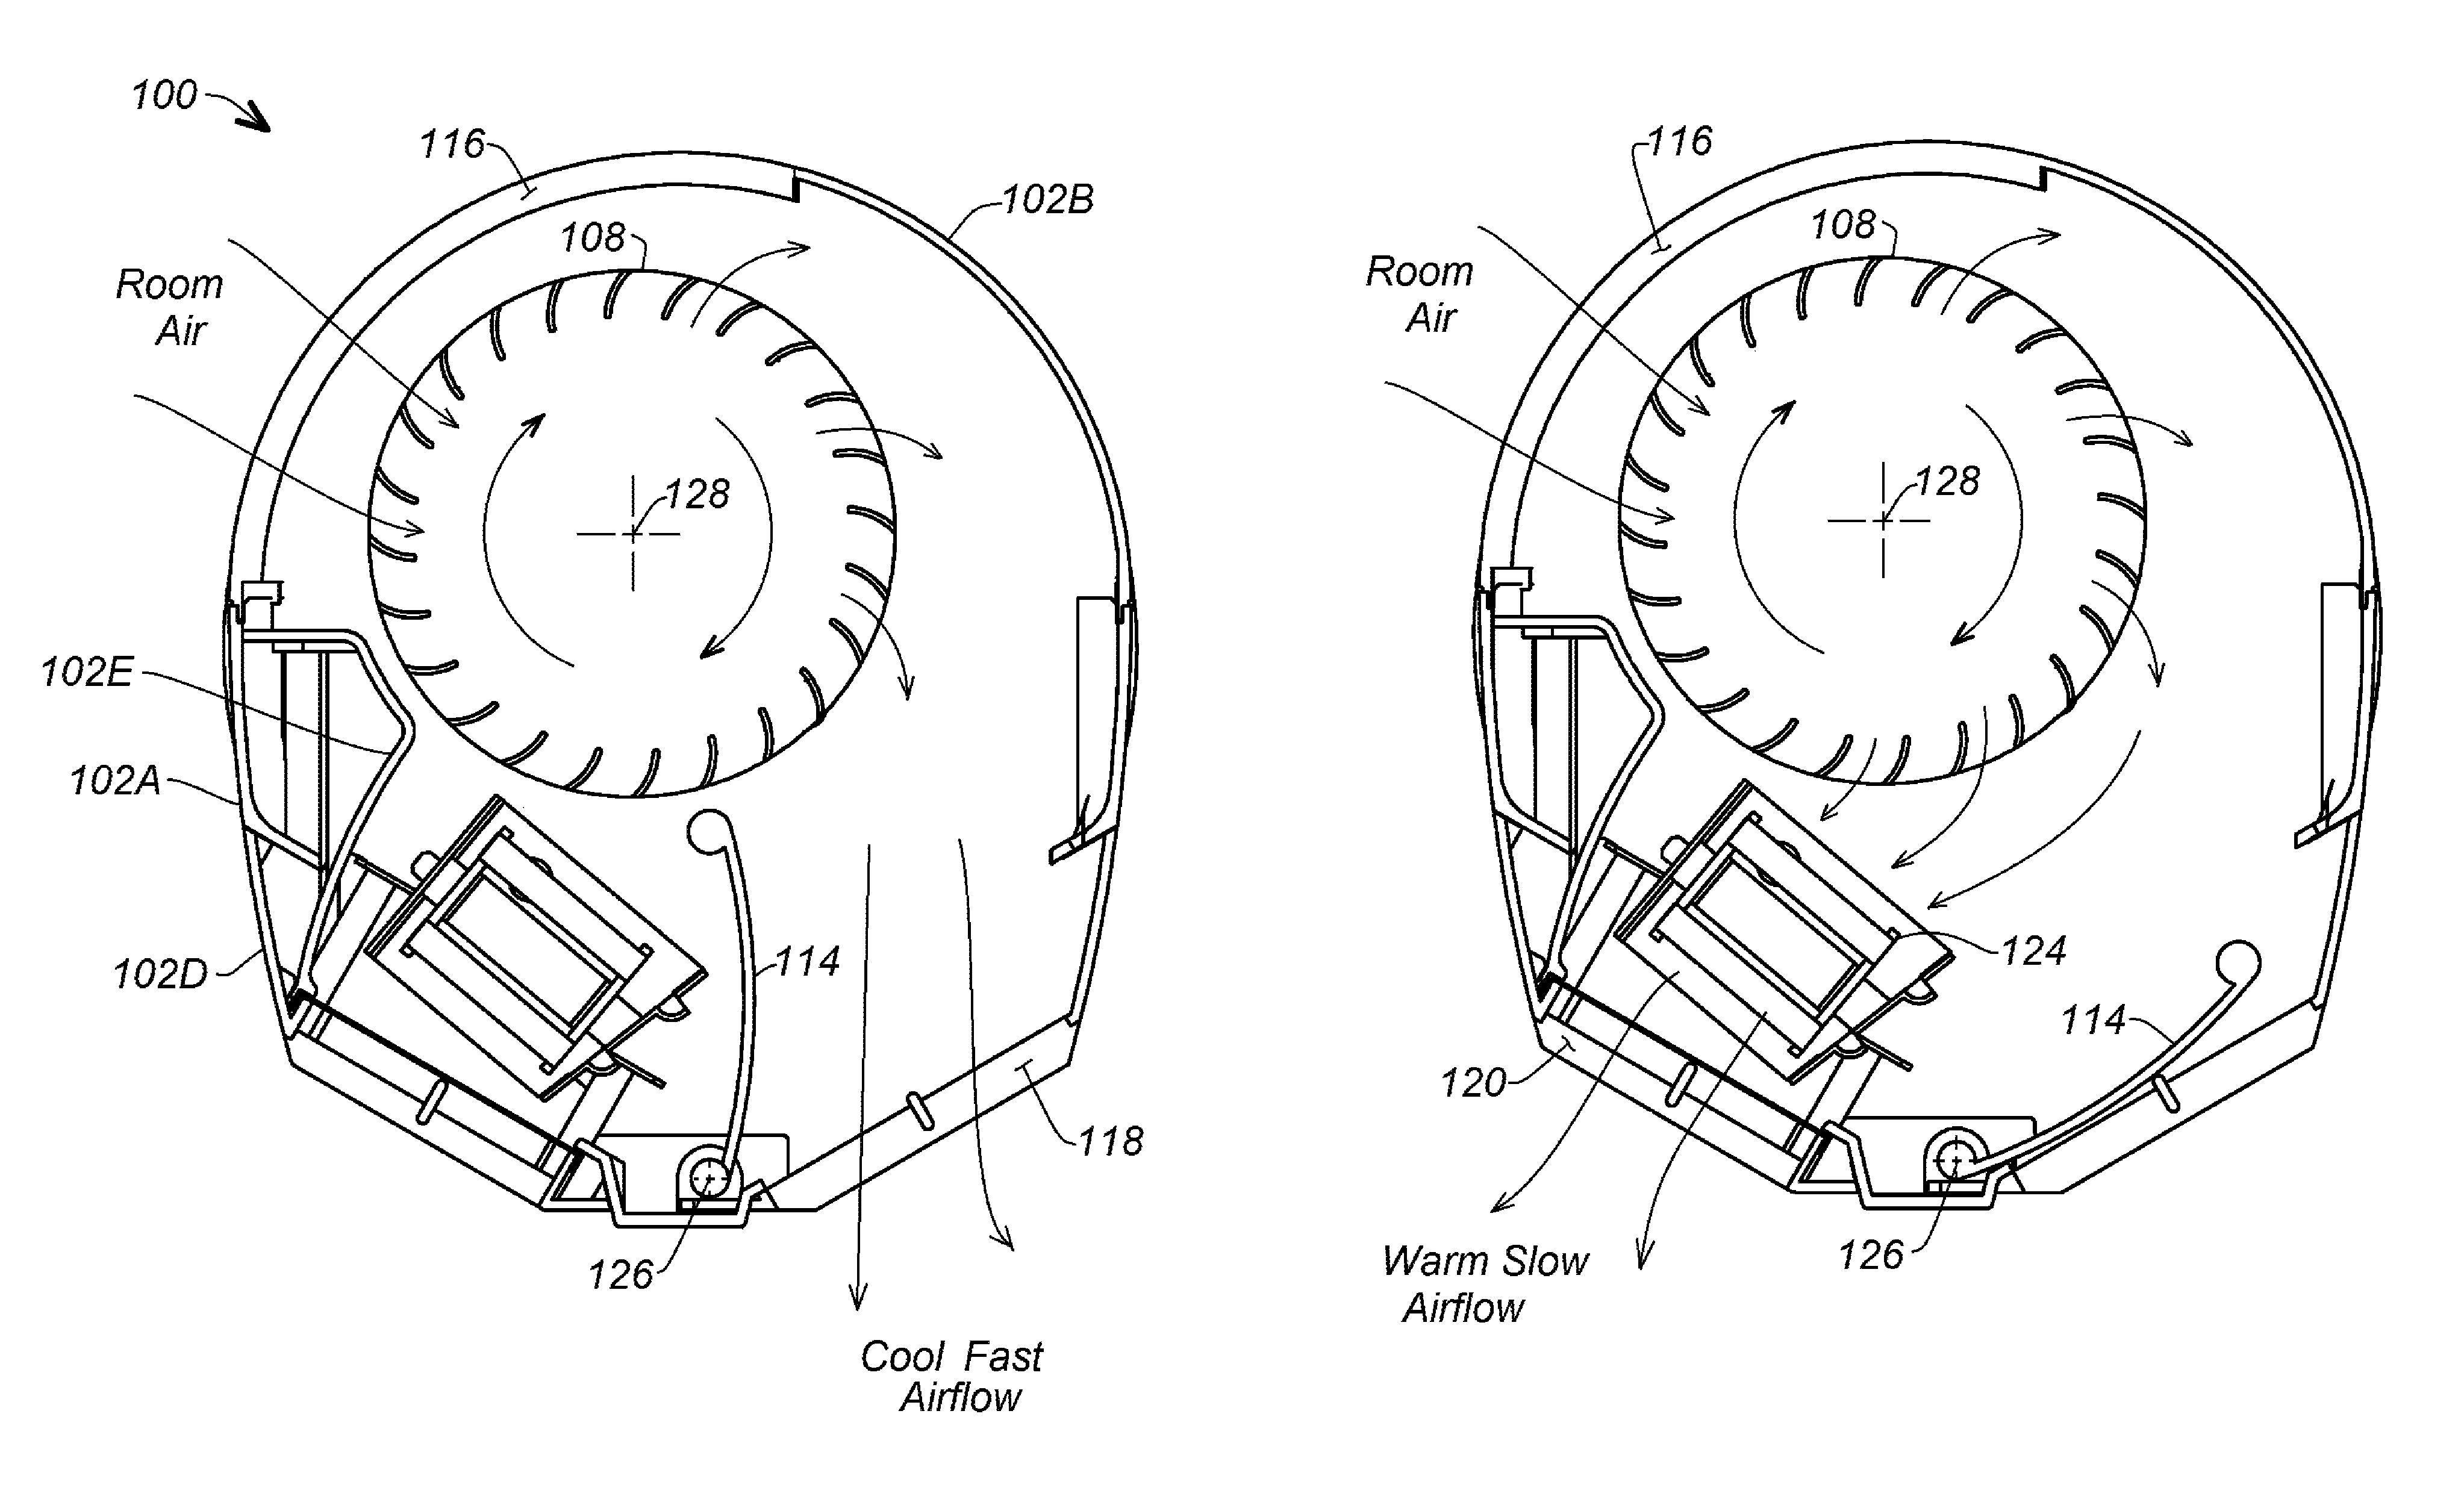 Heating and cooling apparatus